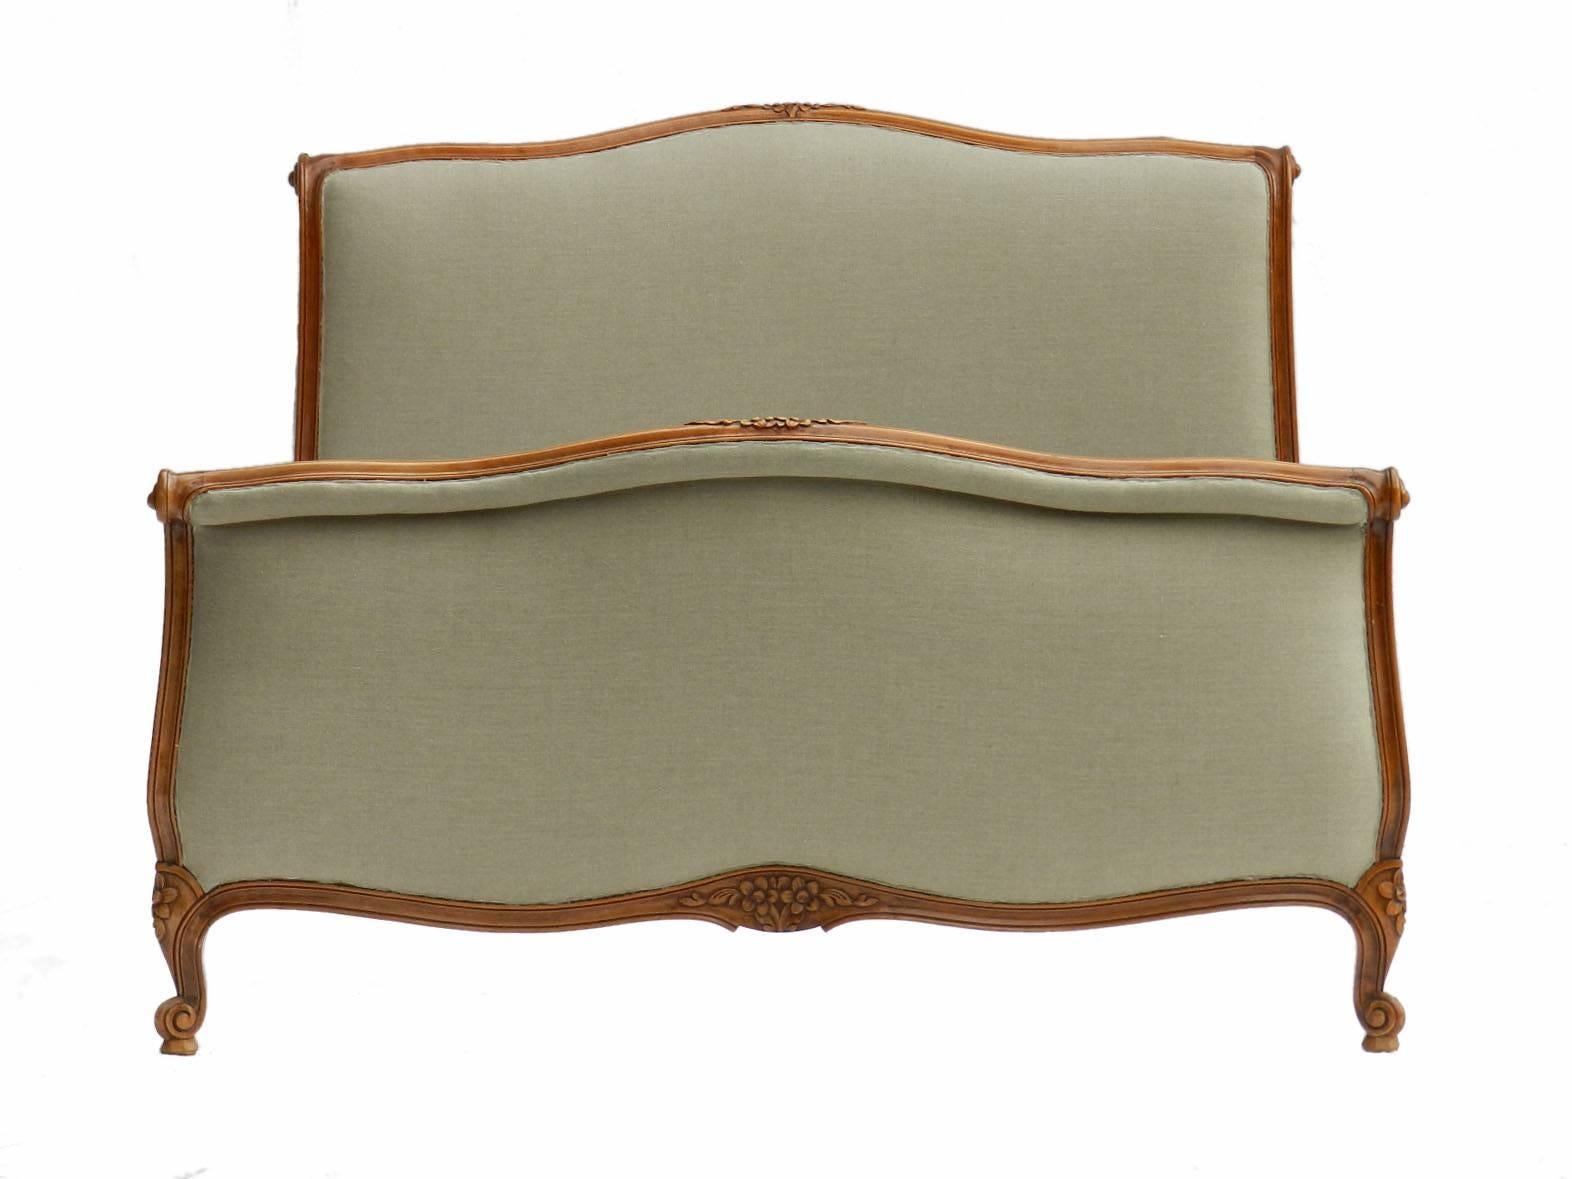 Scroll End French bed covered in 100% natural linen with a lovely simple piping (not shown in photos)
Vintage scroll end cherrywood frame
This bed has been sympathetically extended in length to fit a US full double or US Queen across the whole width